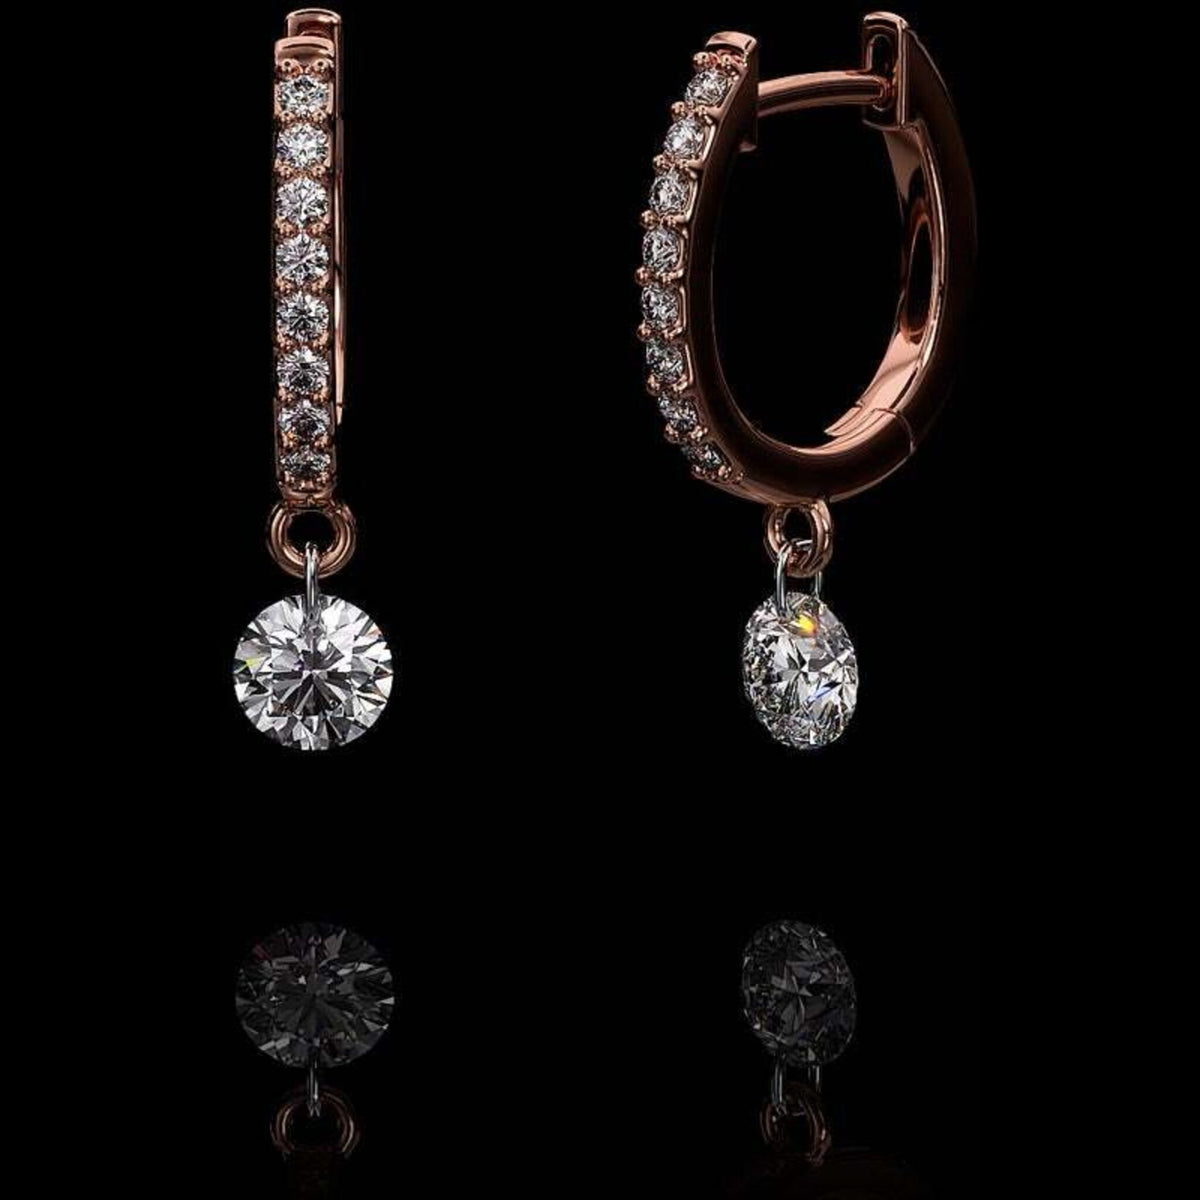 Aresa New York - Beauvoir No. 1 Earrings - 18K Rose Gold with 0.70 cts. of Diamonds